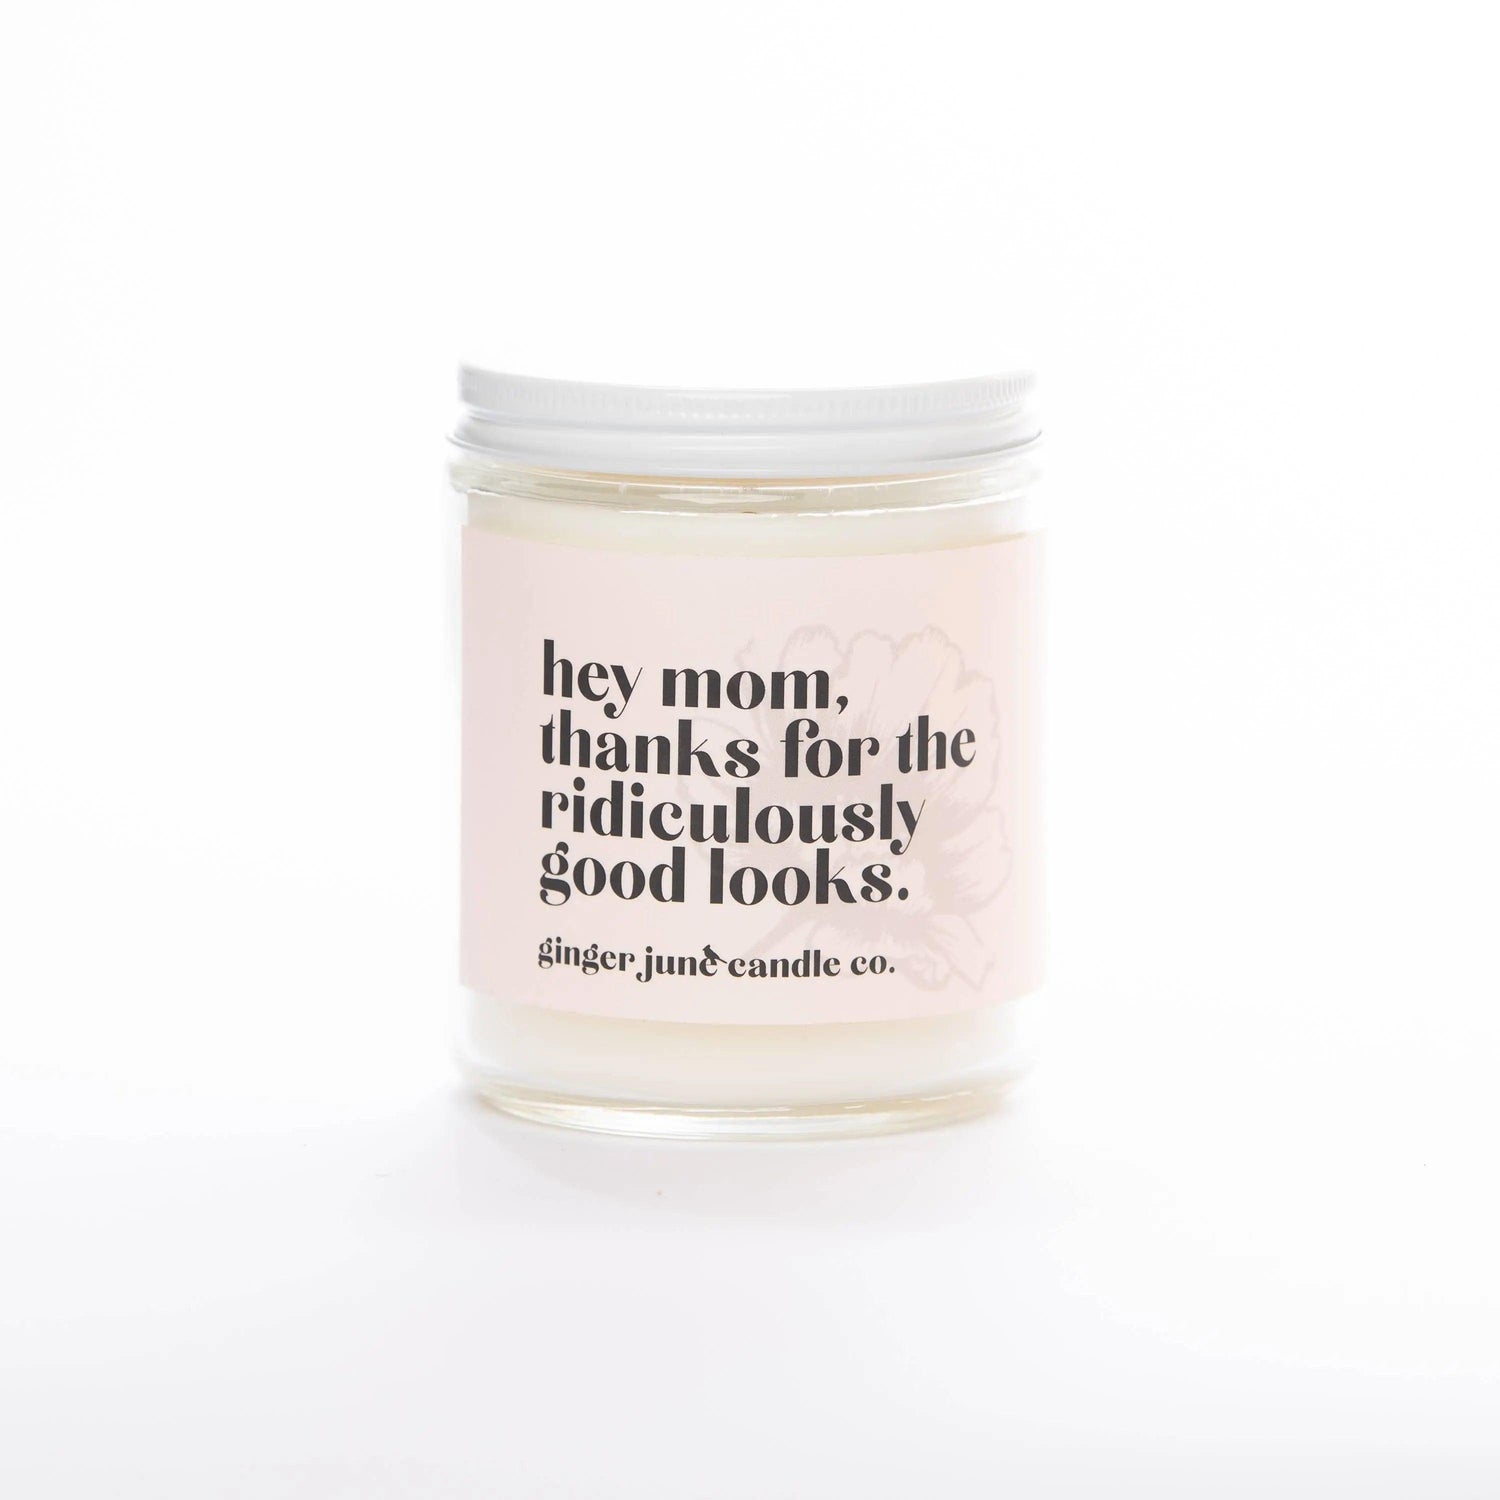 MOM, THANKS FOR RIDICULOUSLY GOOD LOOKS NON TOXIC SOY CANDLE Ginger June Candle Co.